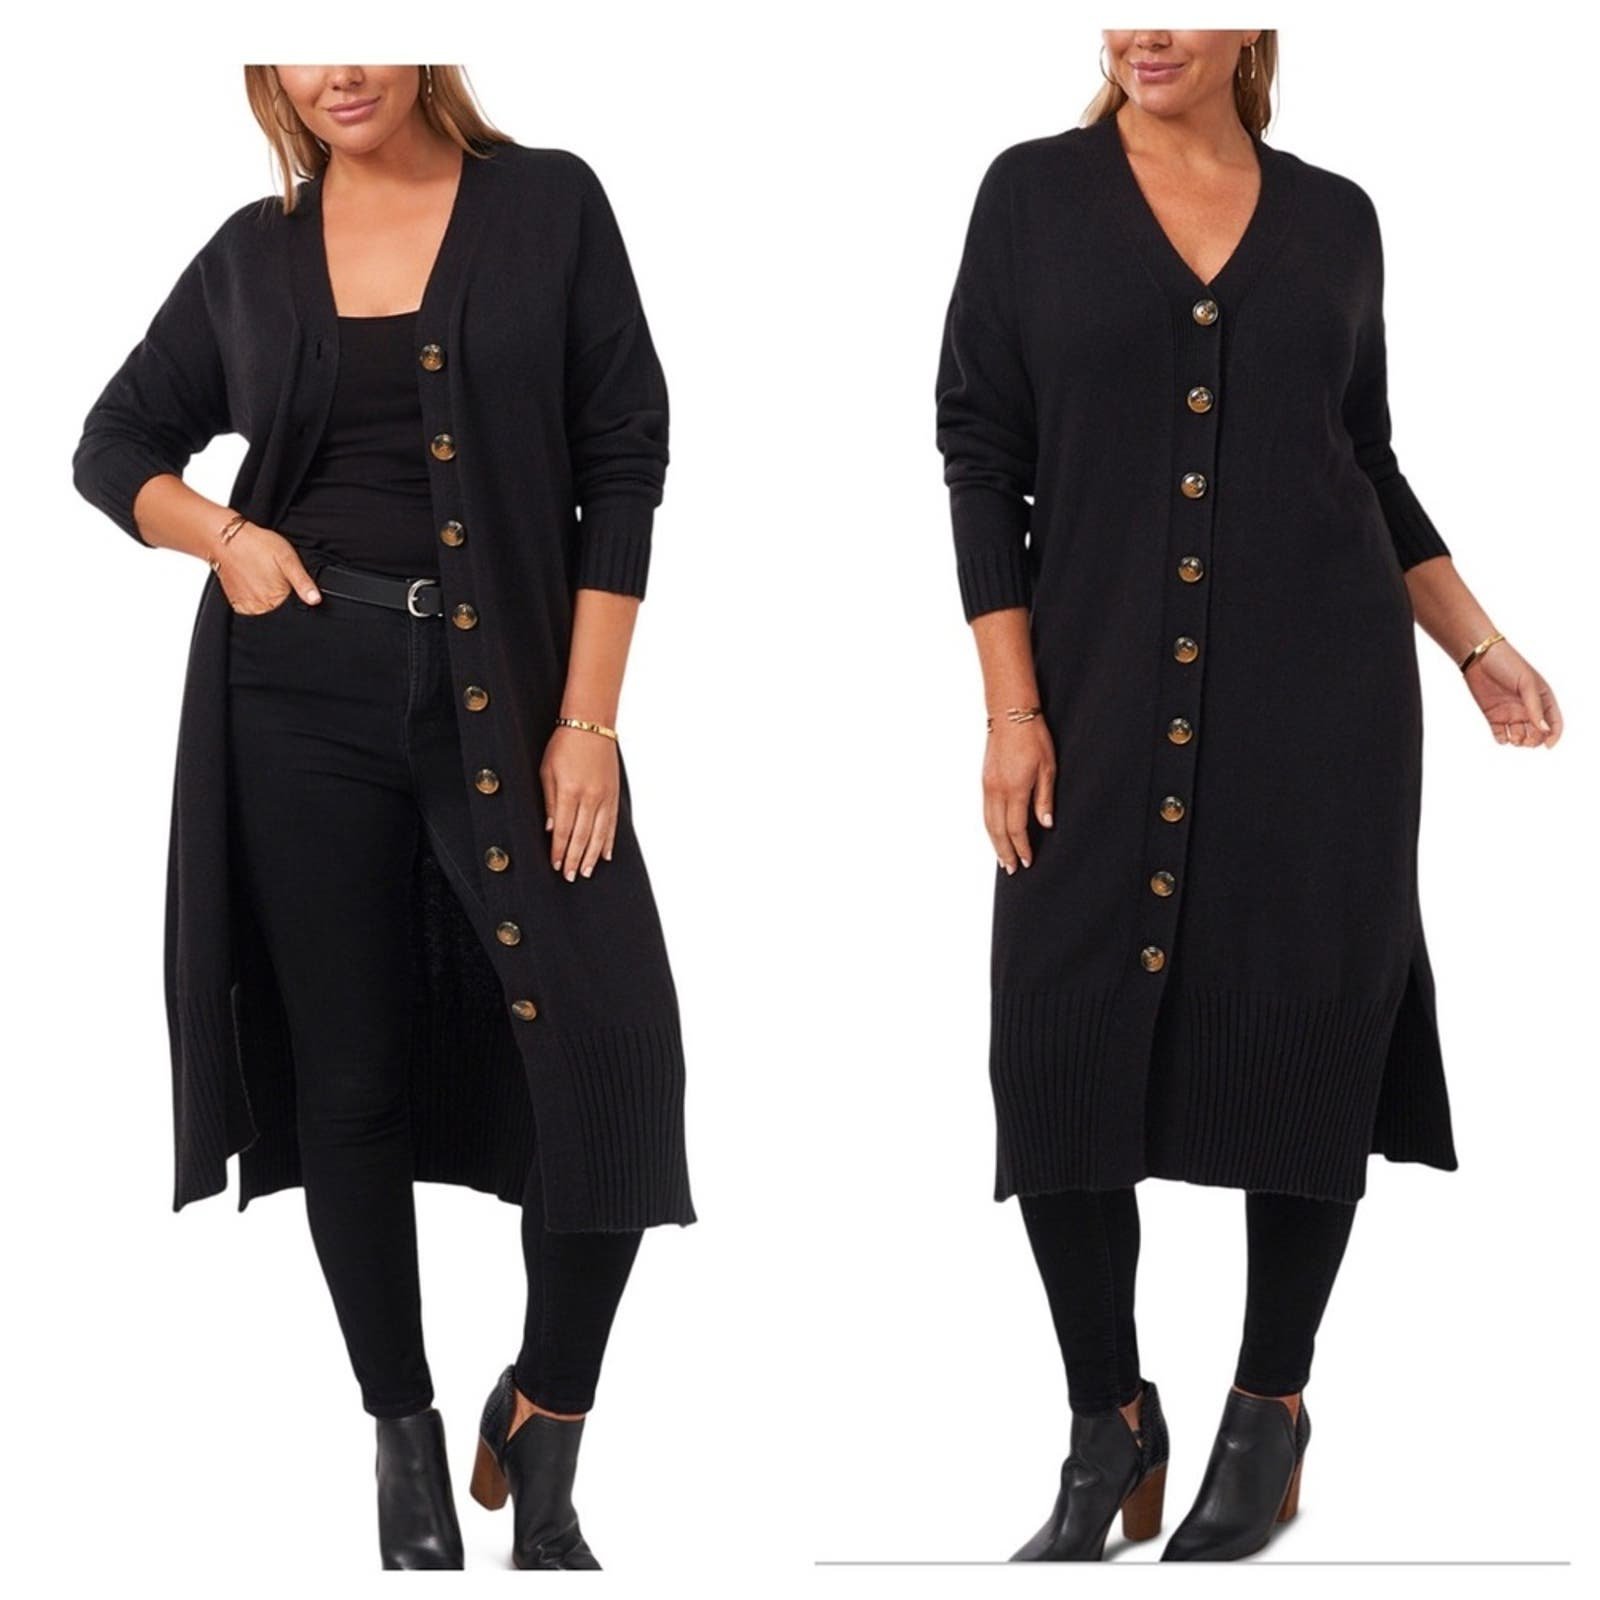 NWT Vince Camuto Plus Size Button Front Duster Cardigan